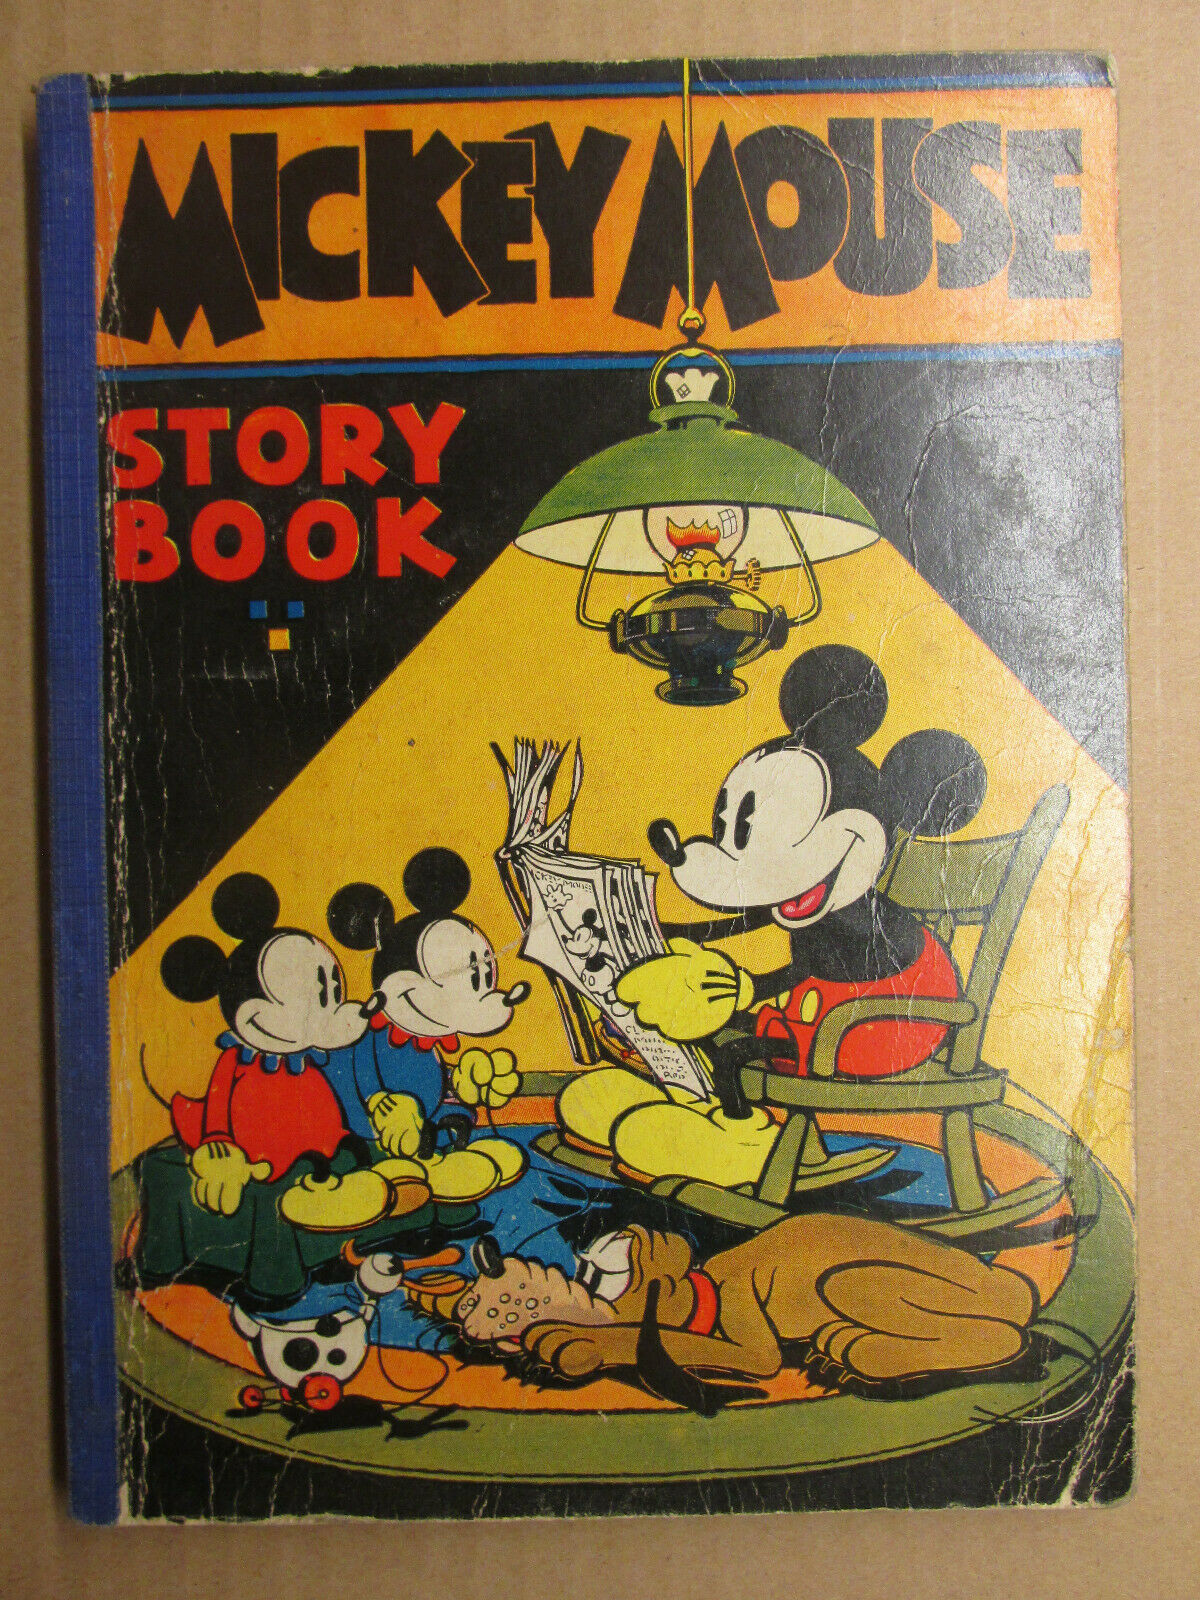 Mickey Mouse Story Book 1931 David Mckay Gd/vg 3.0